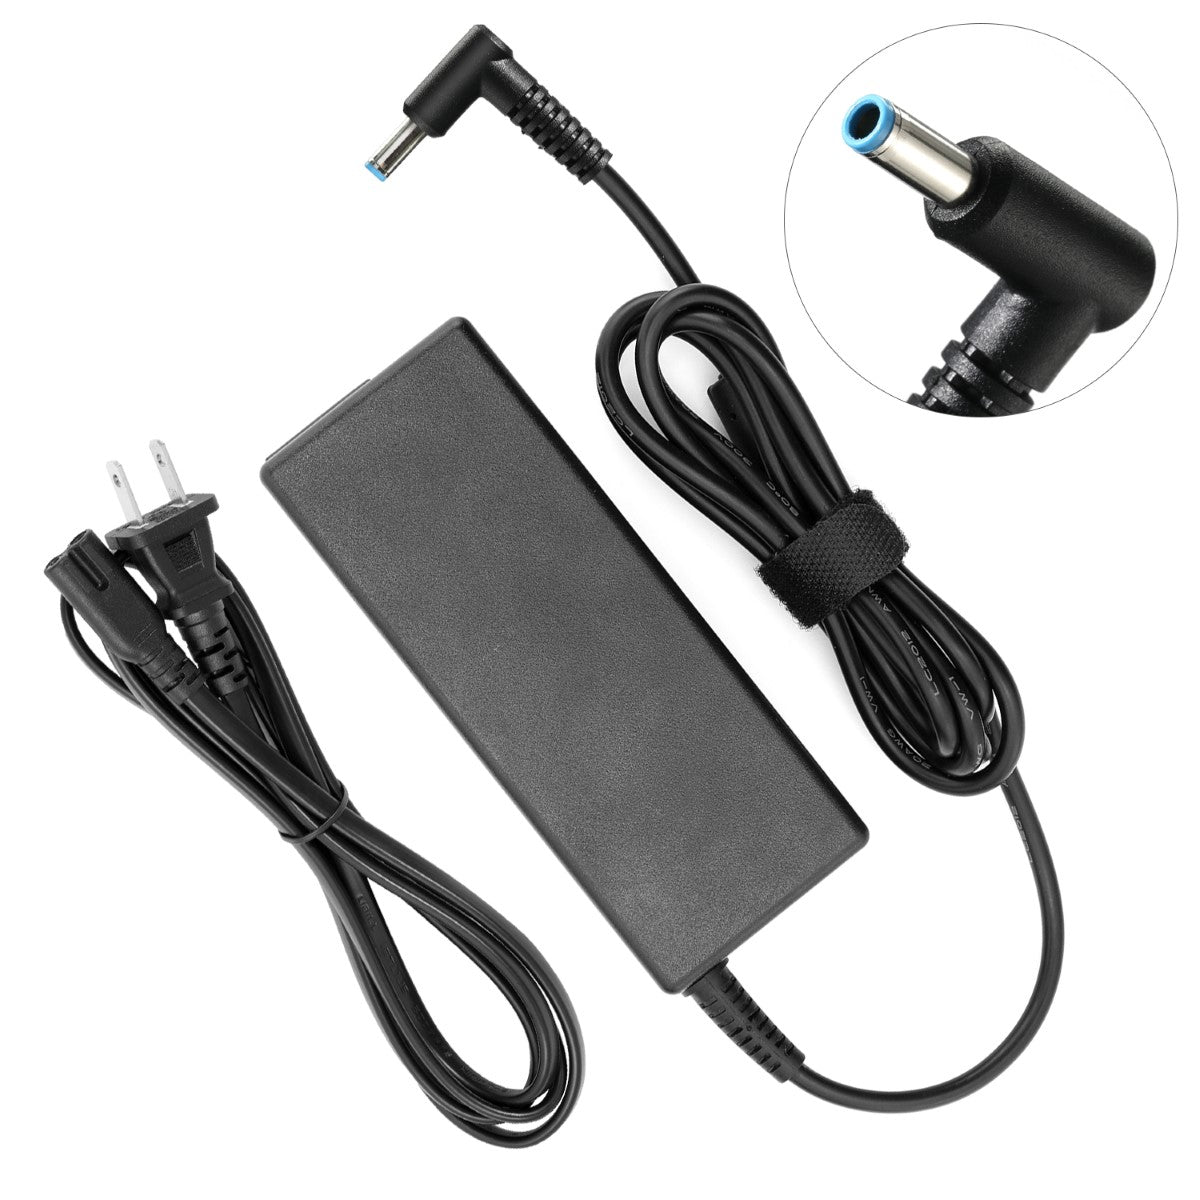 AC Adapter Charger for HP Pavilion Touchsmart 17z-f000 Notebook.